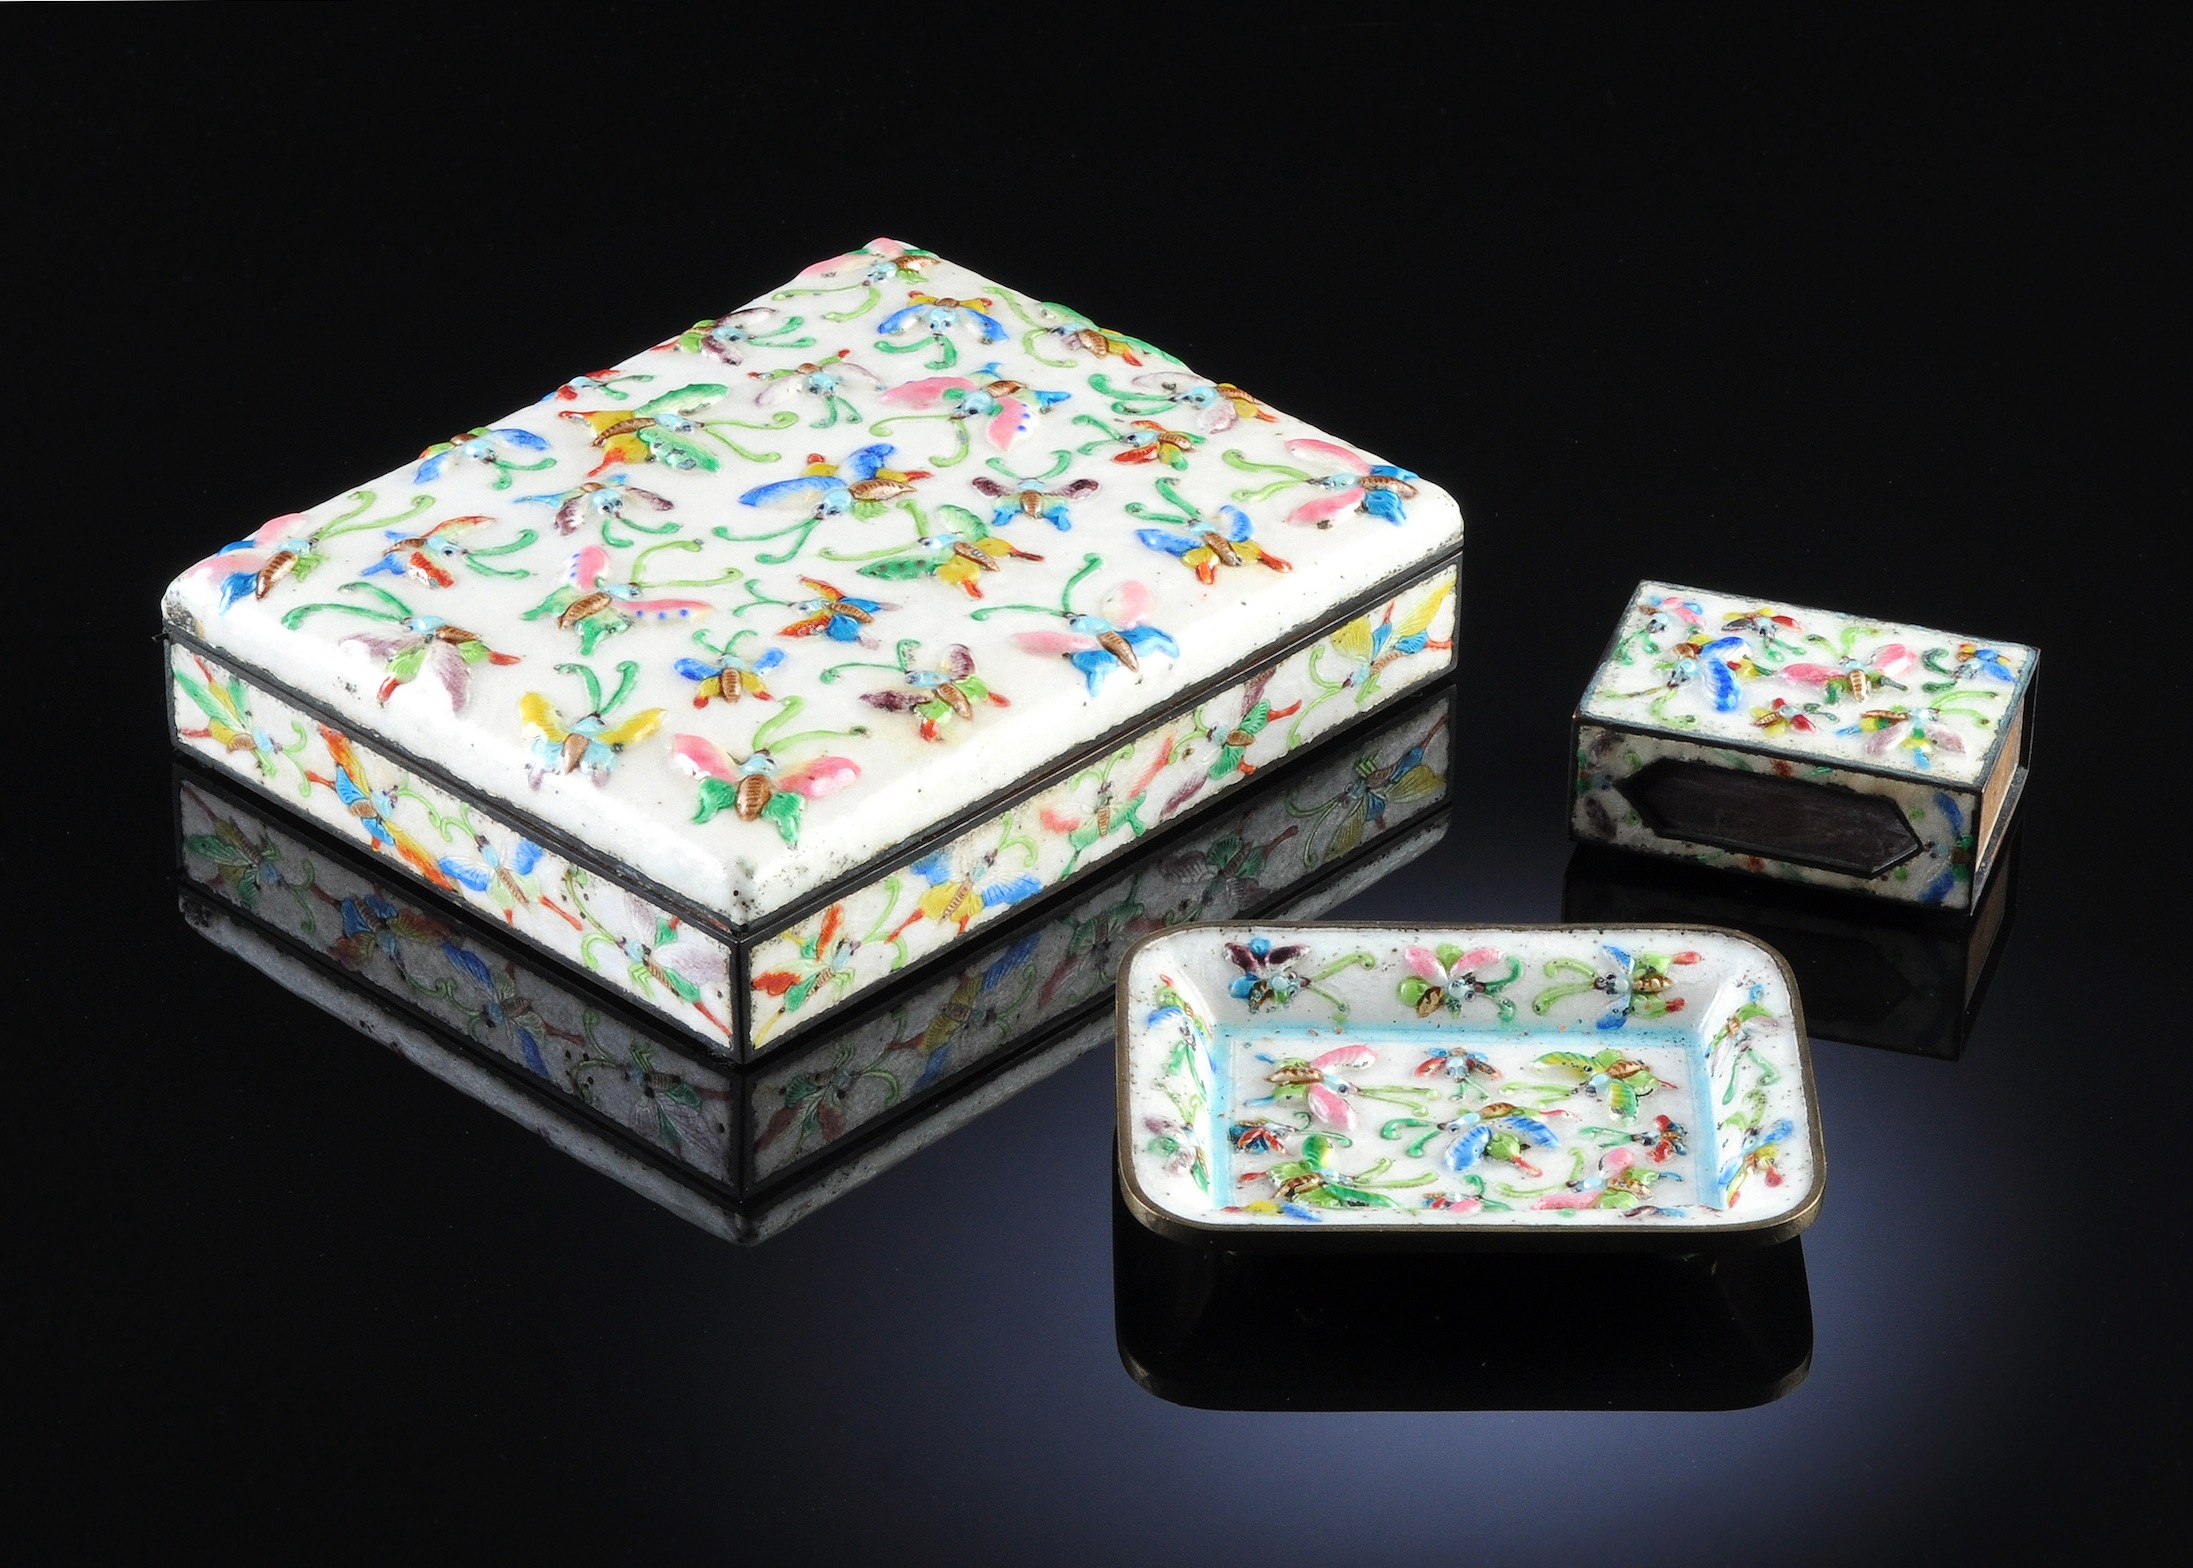 A VINTAGE CHINESE POLYCHROME ENAMELED THREE PIECE SMOKING SET DECORATED WITH BUTTERFLIES IN HIGH